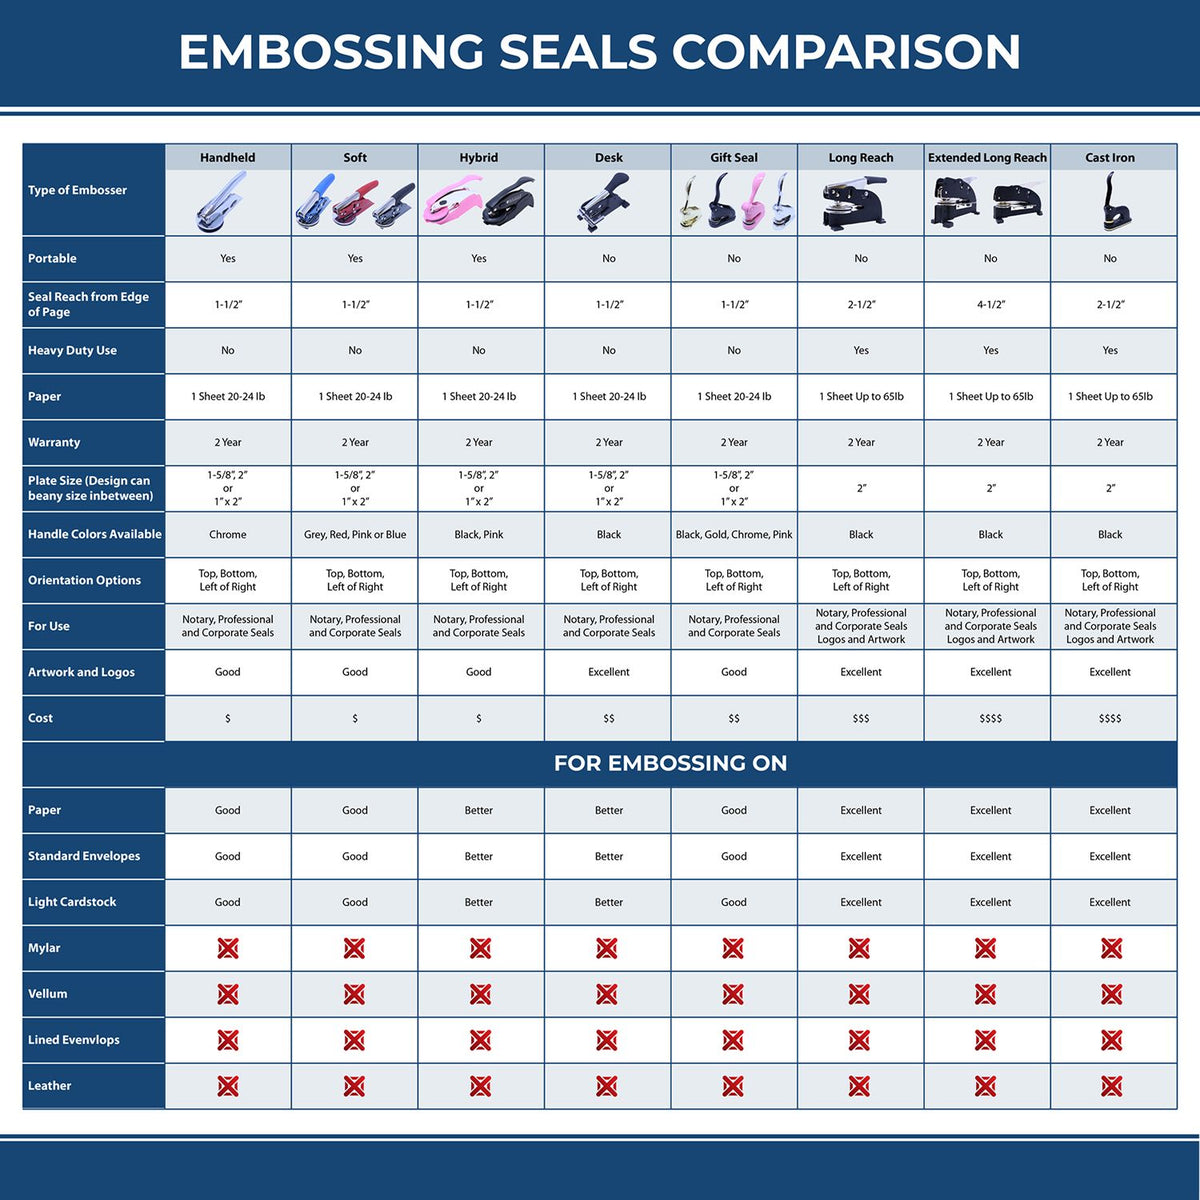 A comparison chart for the different types of mount models available for the Extended Long Reach Mississippi Surveyor Embosser.